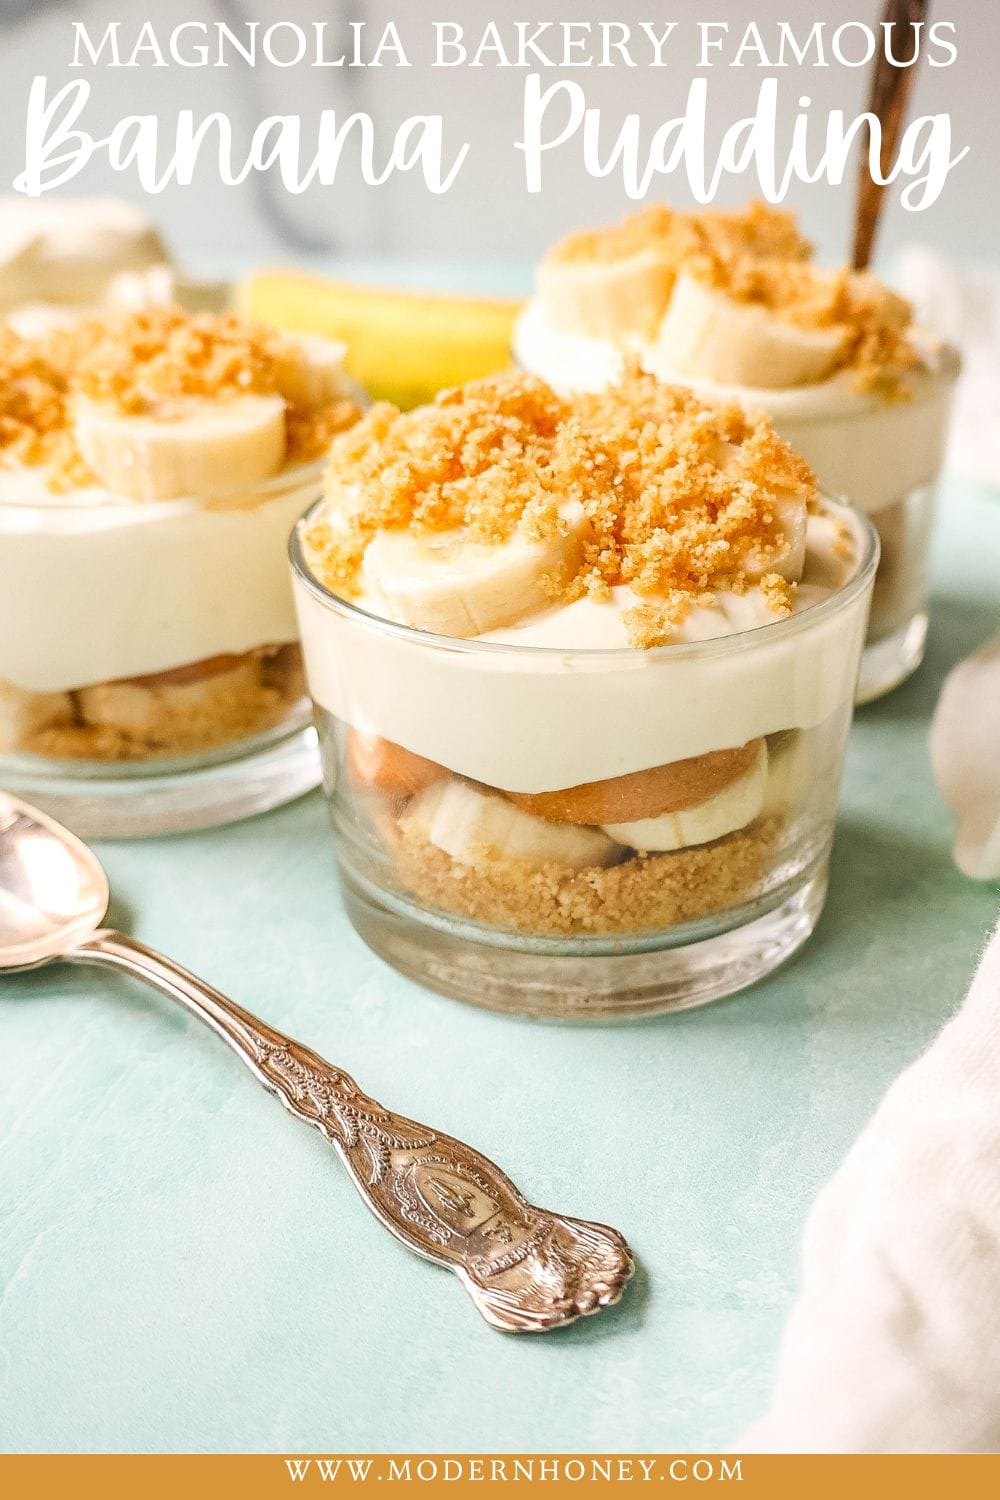 The Famous Magnolia Bakery Banana Pudding is the best banana pudding recipe ever! This iconic NYC Bakery is known for its banana pudding and I am sharing their famous banana pudding recipe with you! Homemade Banana Pudding Recipe